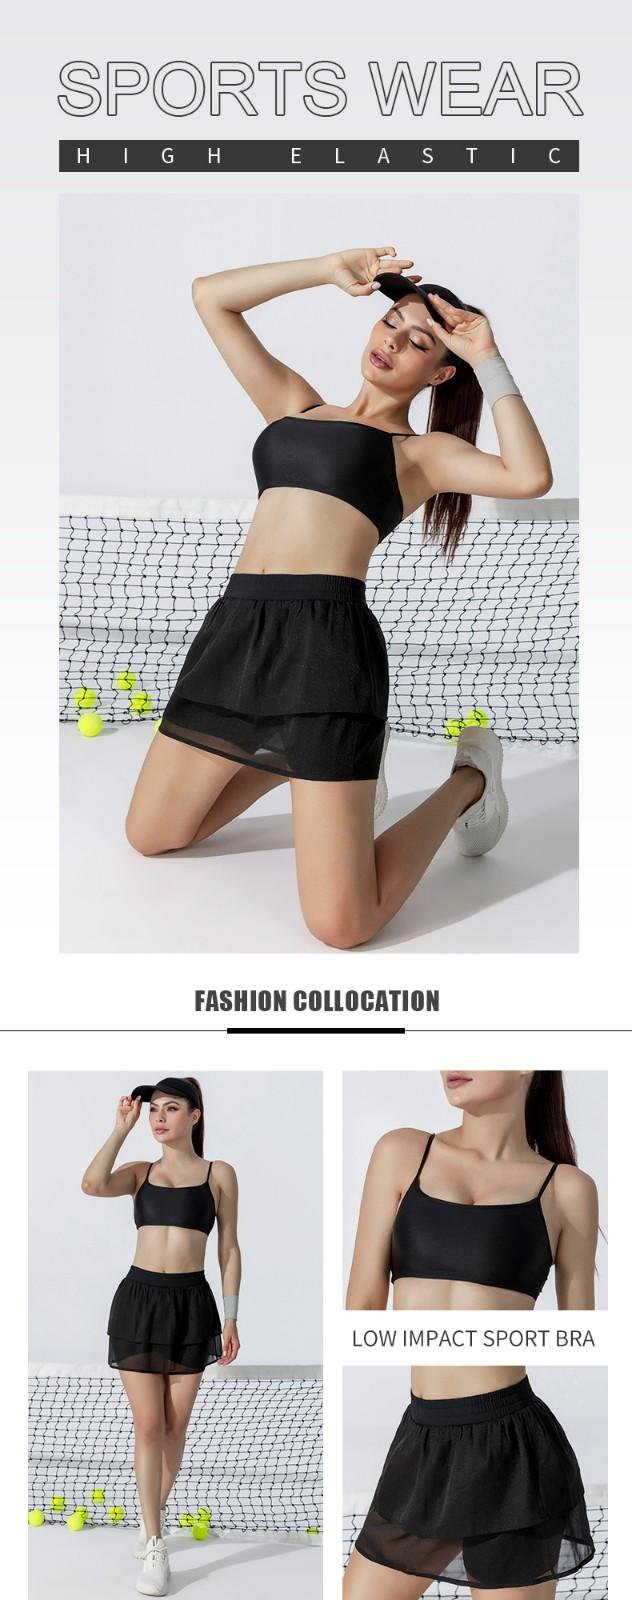 INGOR personalized tennis shorts woman supplier